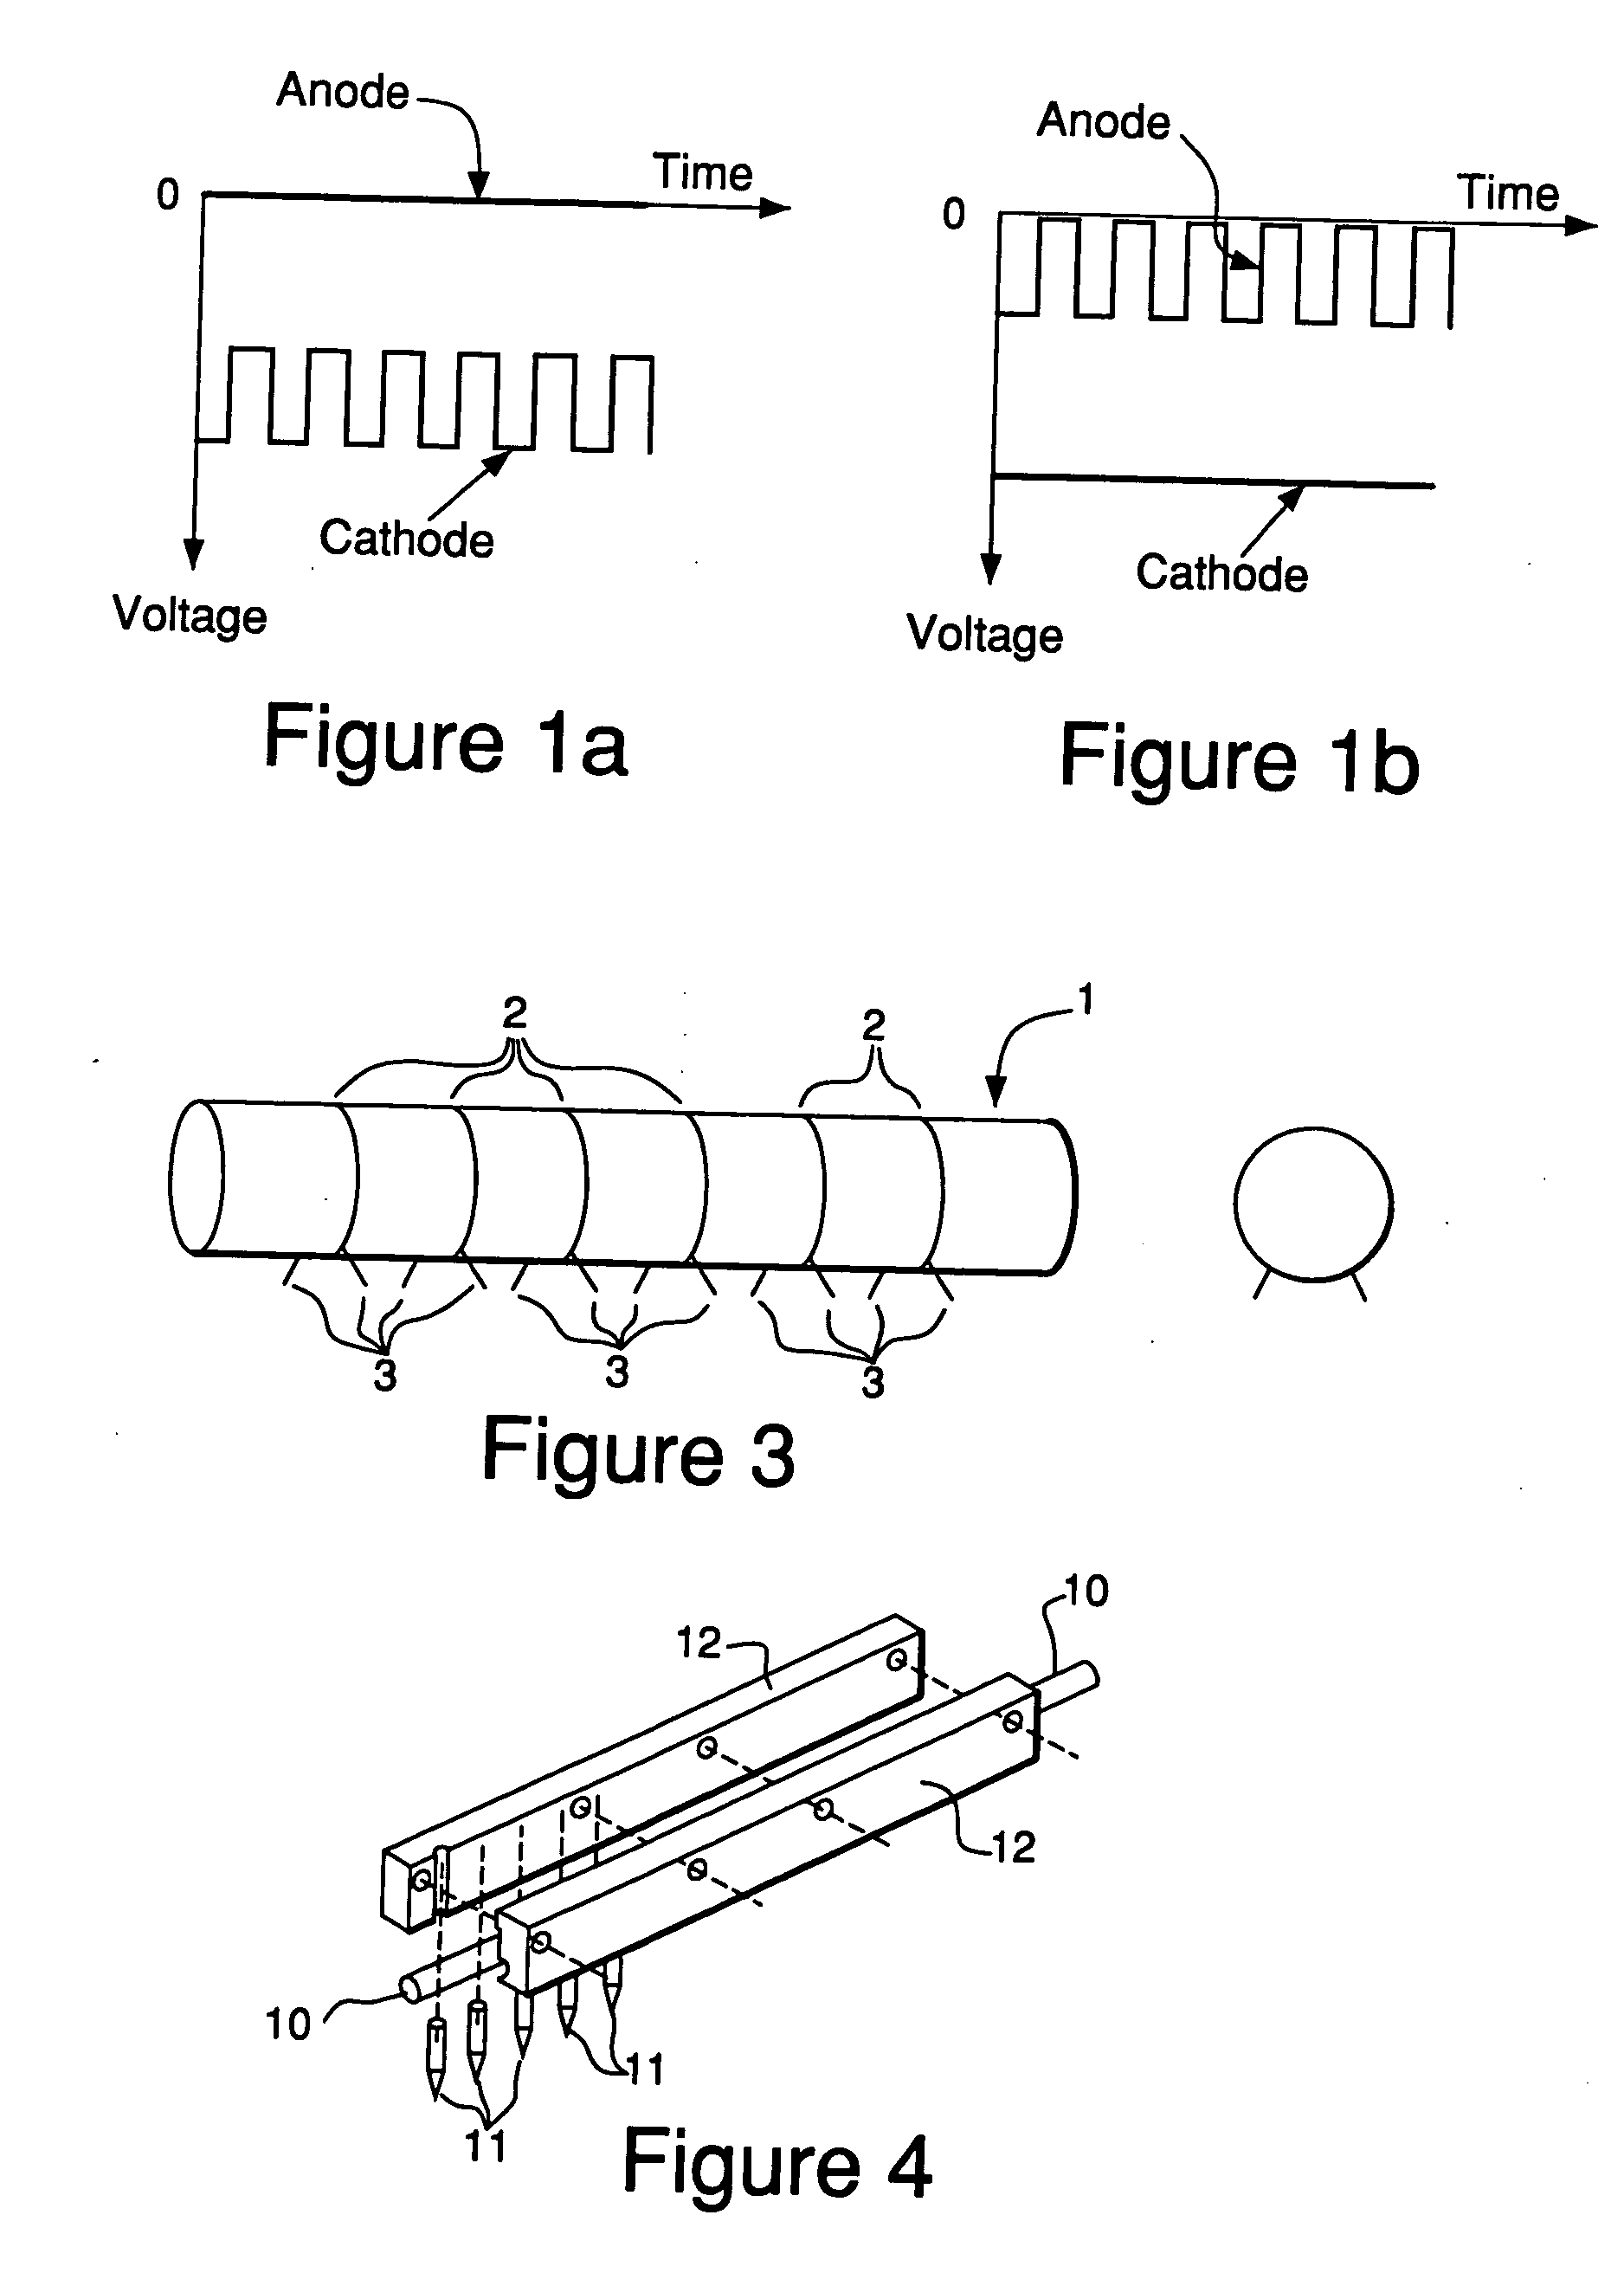 Apparatus and method for removal of surface oxides via fluxless technique involving electron attachment and remote ion generation